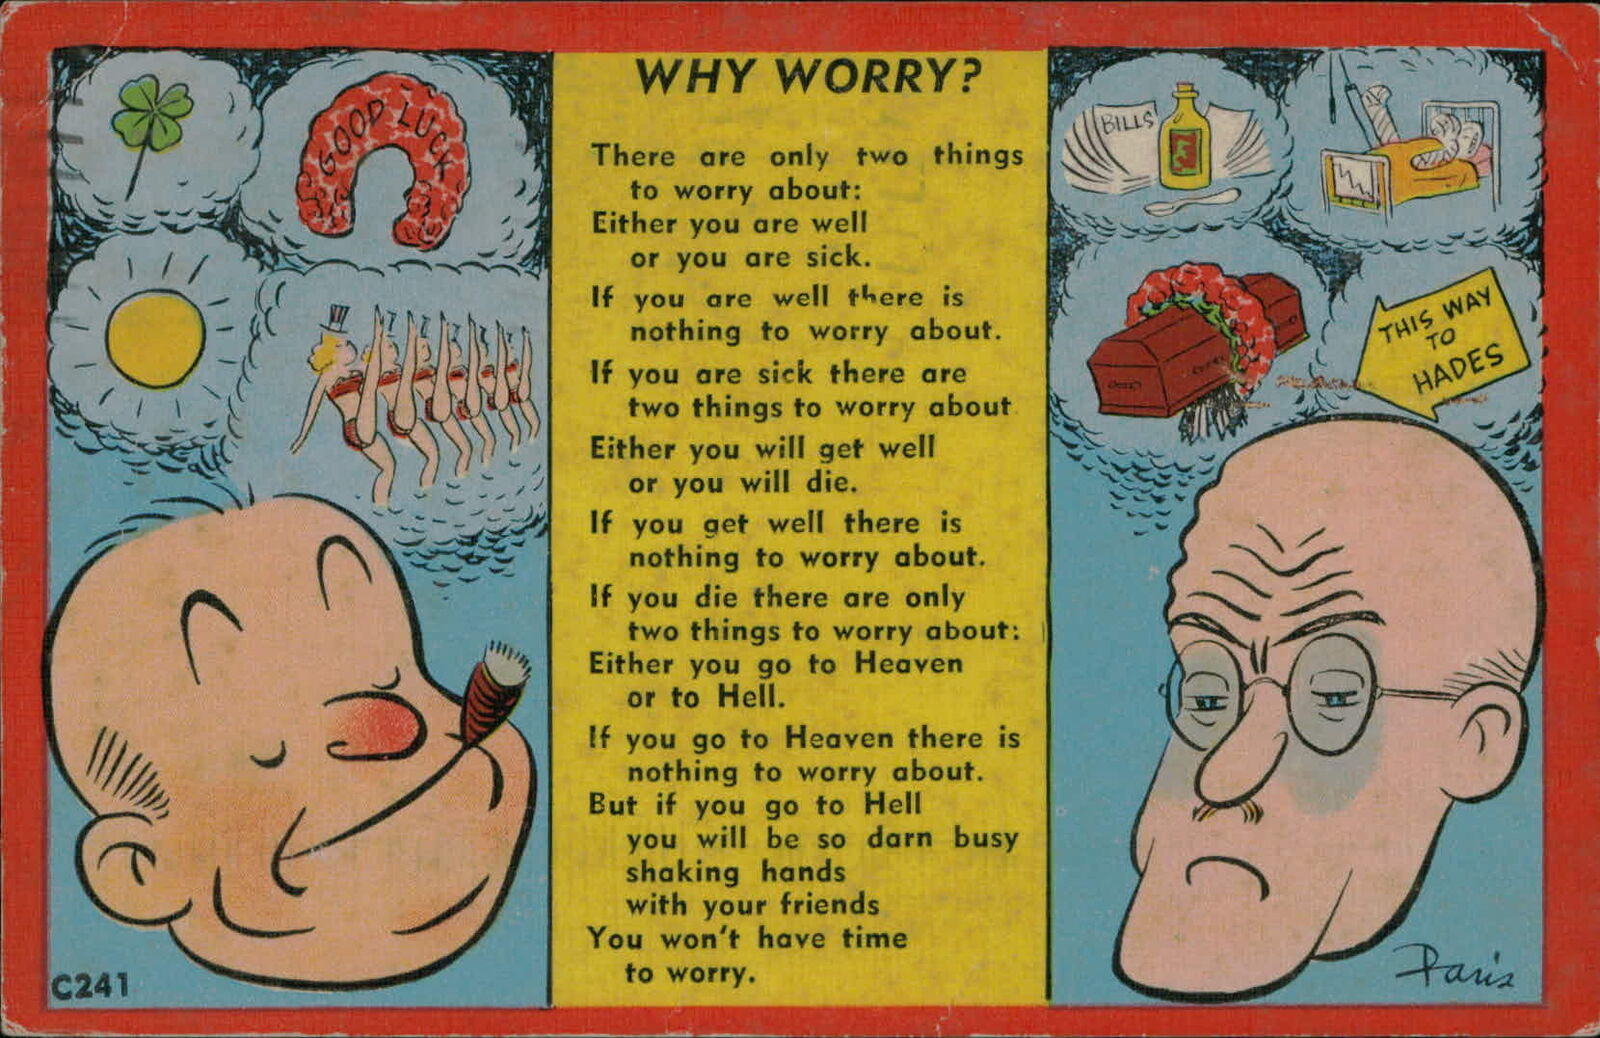 Postcard: WHY WORRY? There are only two things to worry about: Either